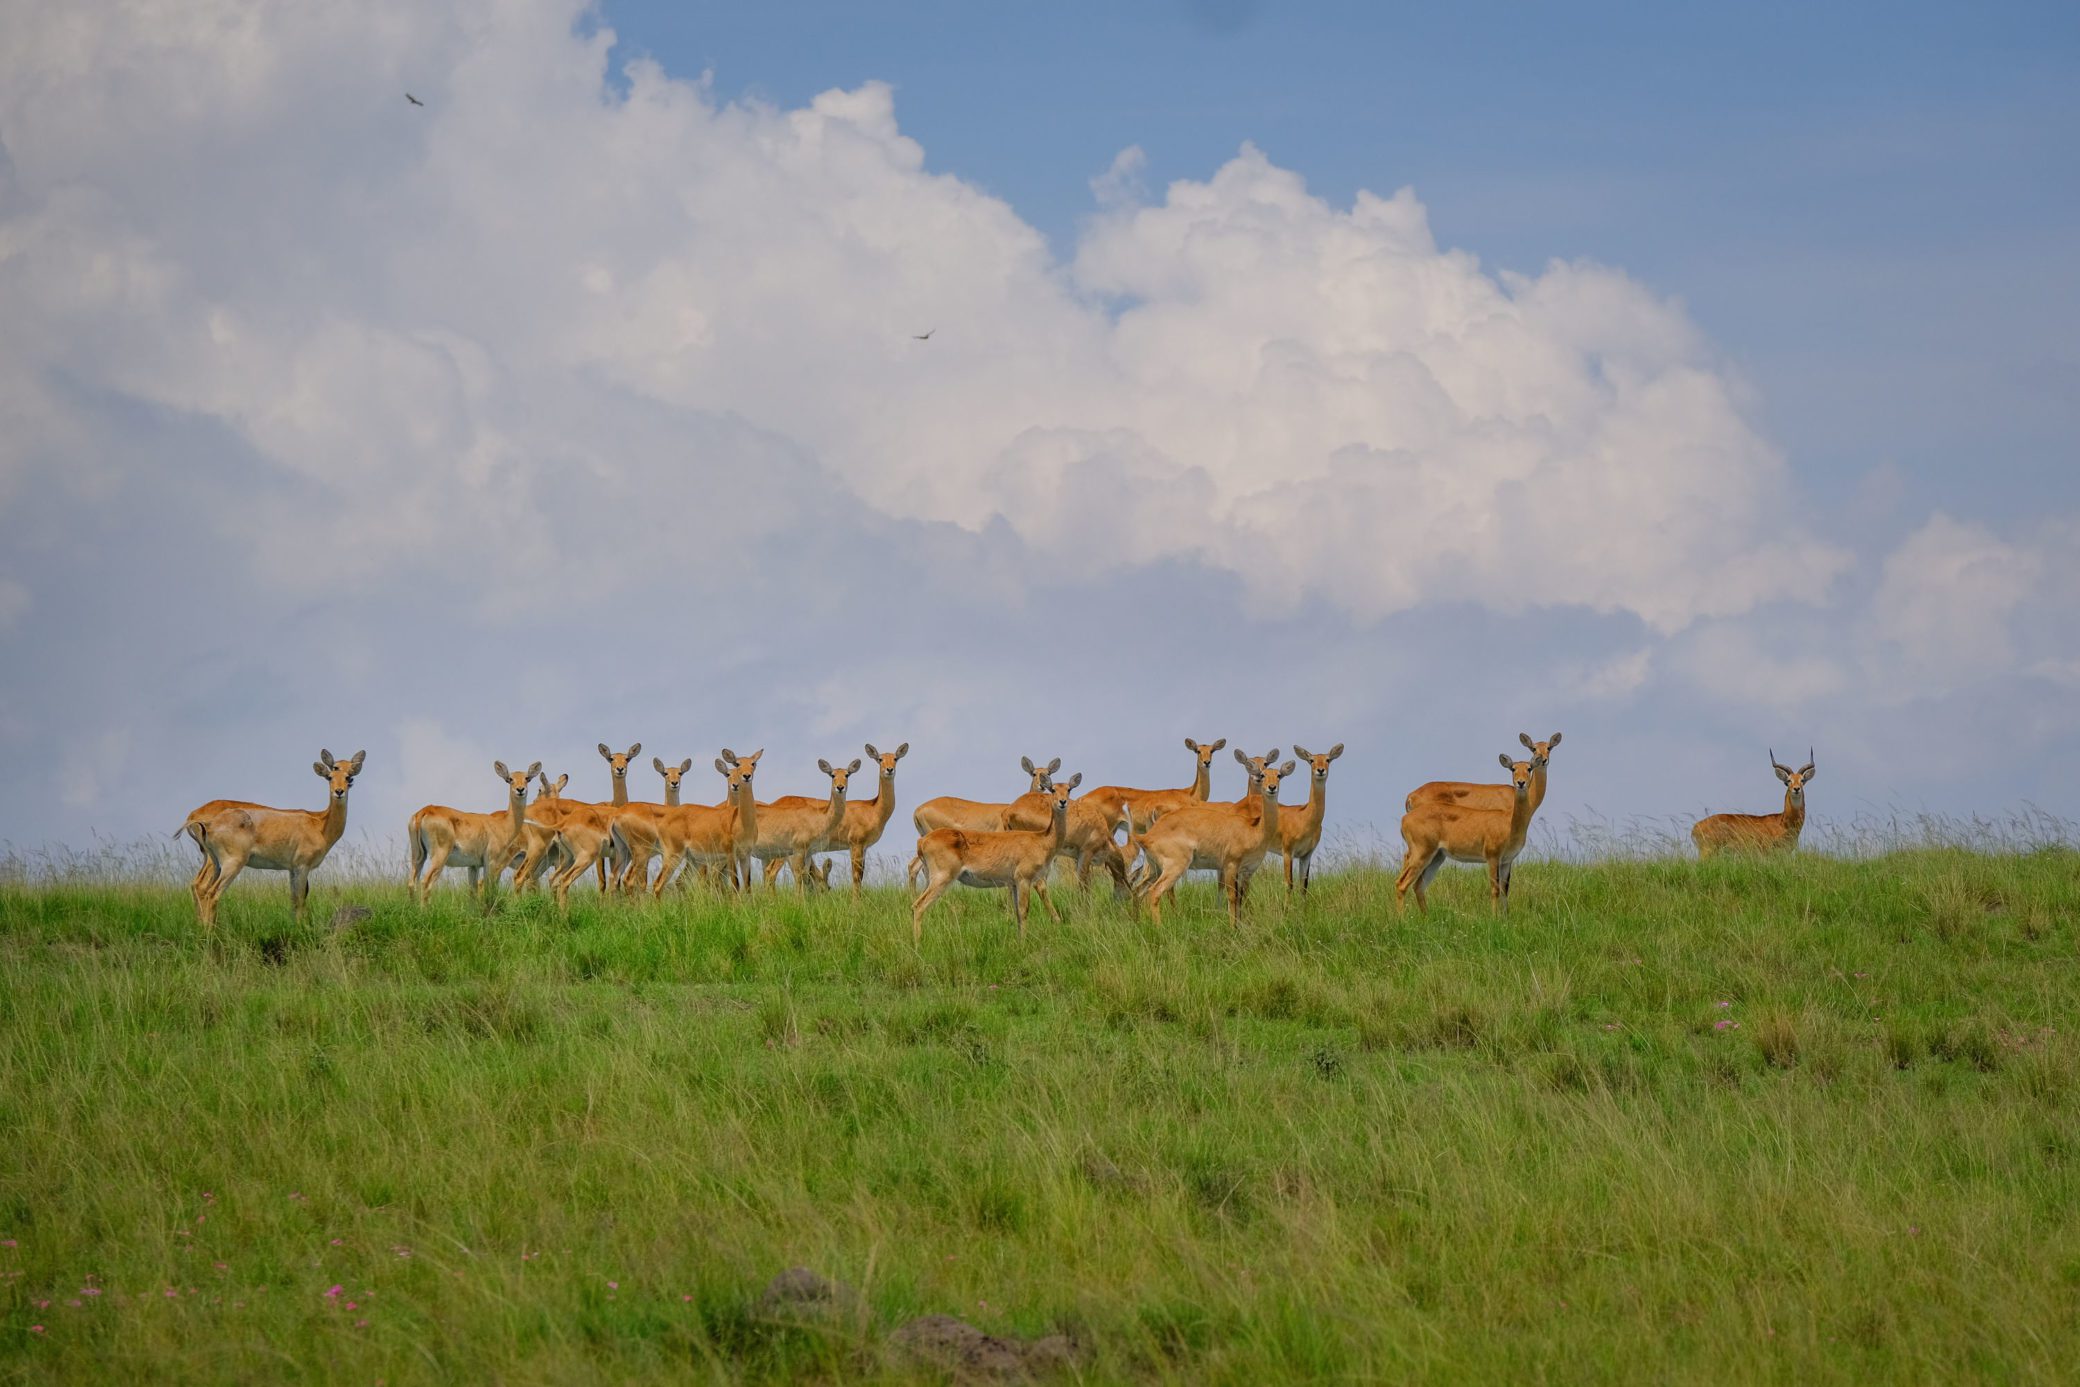 A herd of Impala